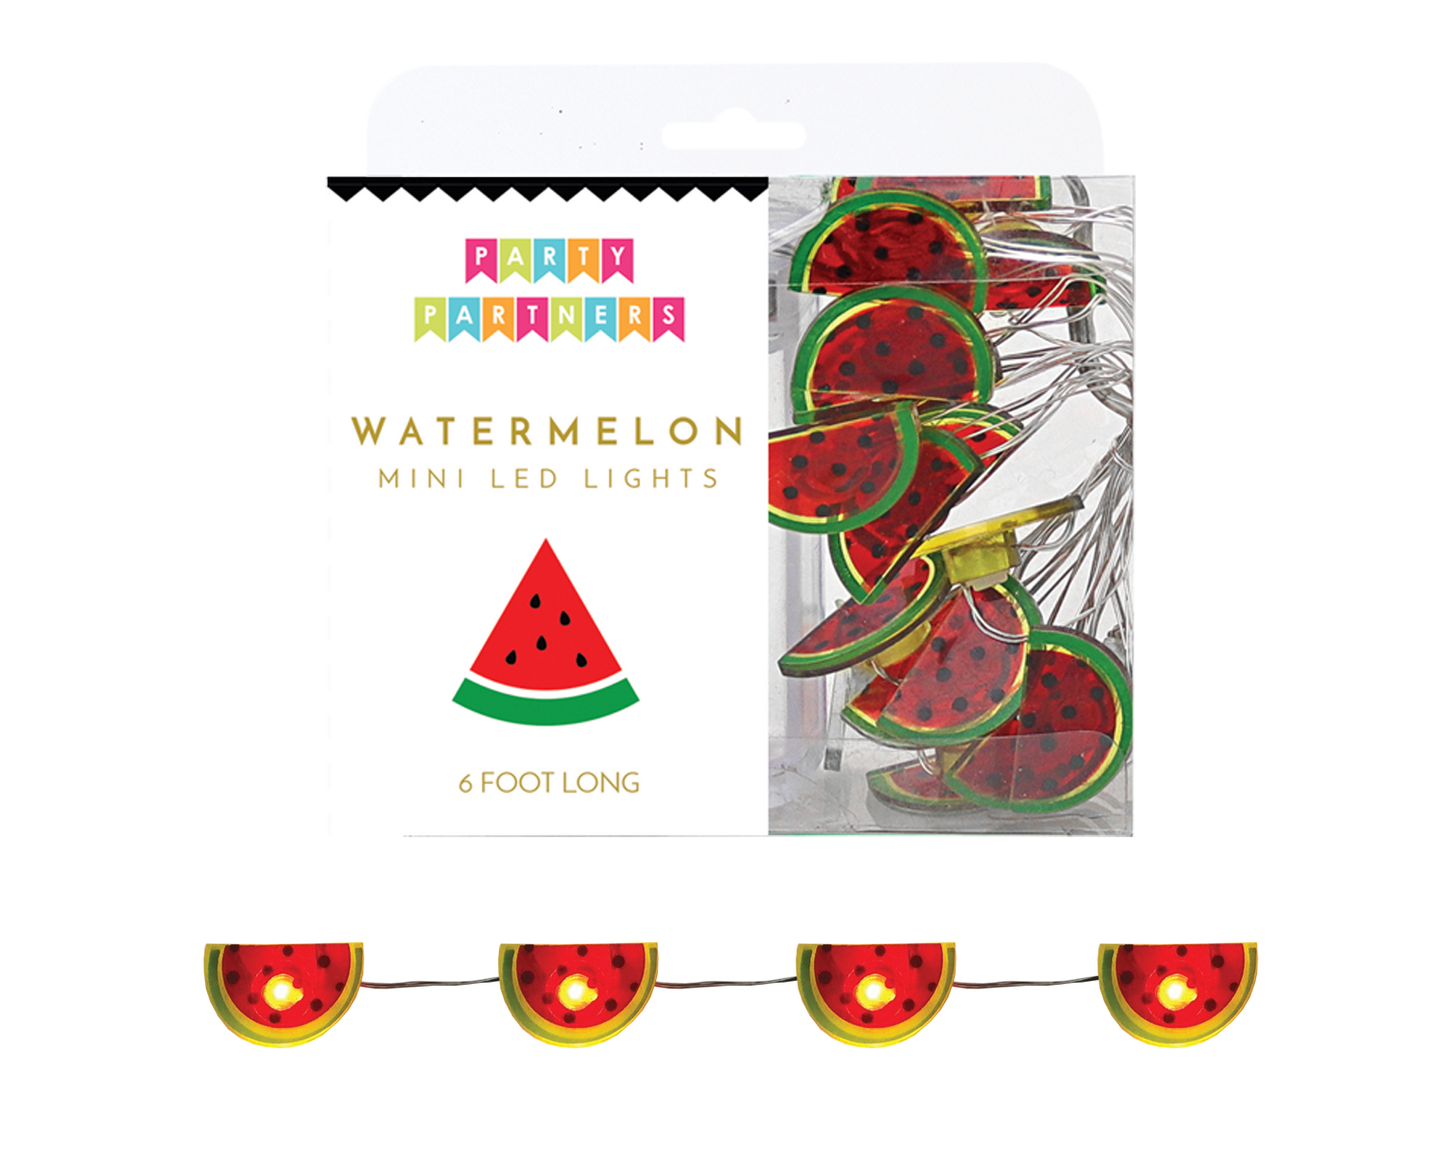 Watermelon Mini Led lights Garland Party Partners - Cardmore